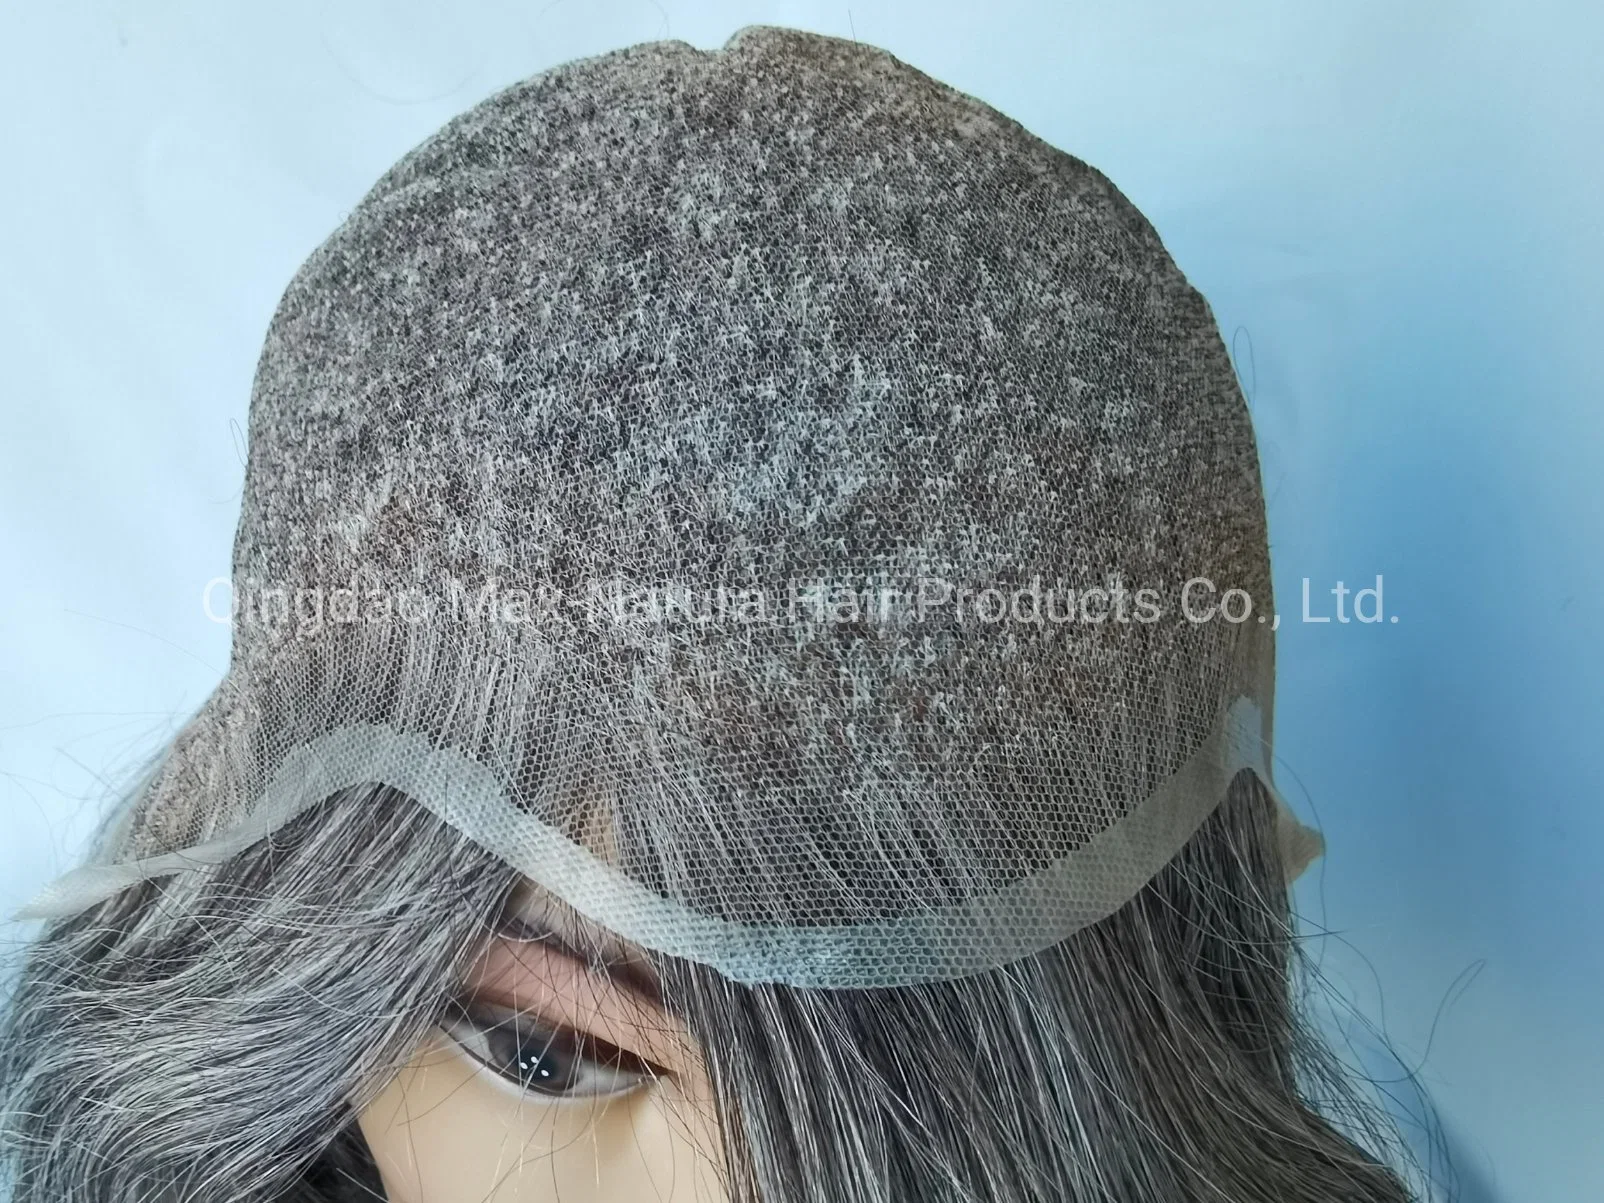 ***Stock***French-Lace (Heavy-Swiss-Lace) with Elastic-Lace and Adjustable-Ribbon Remy-Human-Hair Toupees (1PC left)